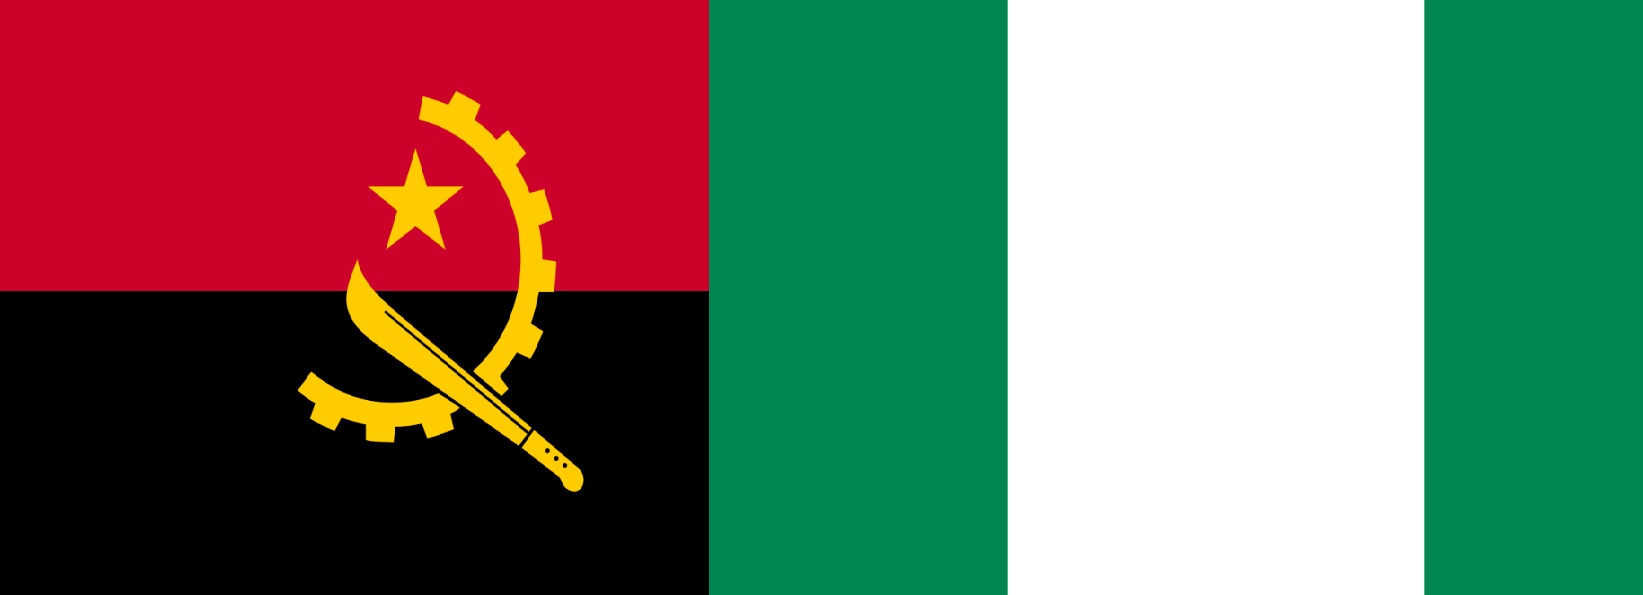 Nigeria joins hand with Angola in strengthening political, socio-economic cooperation